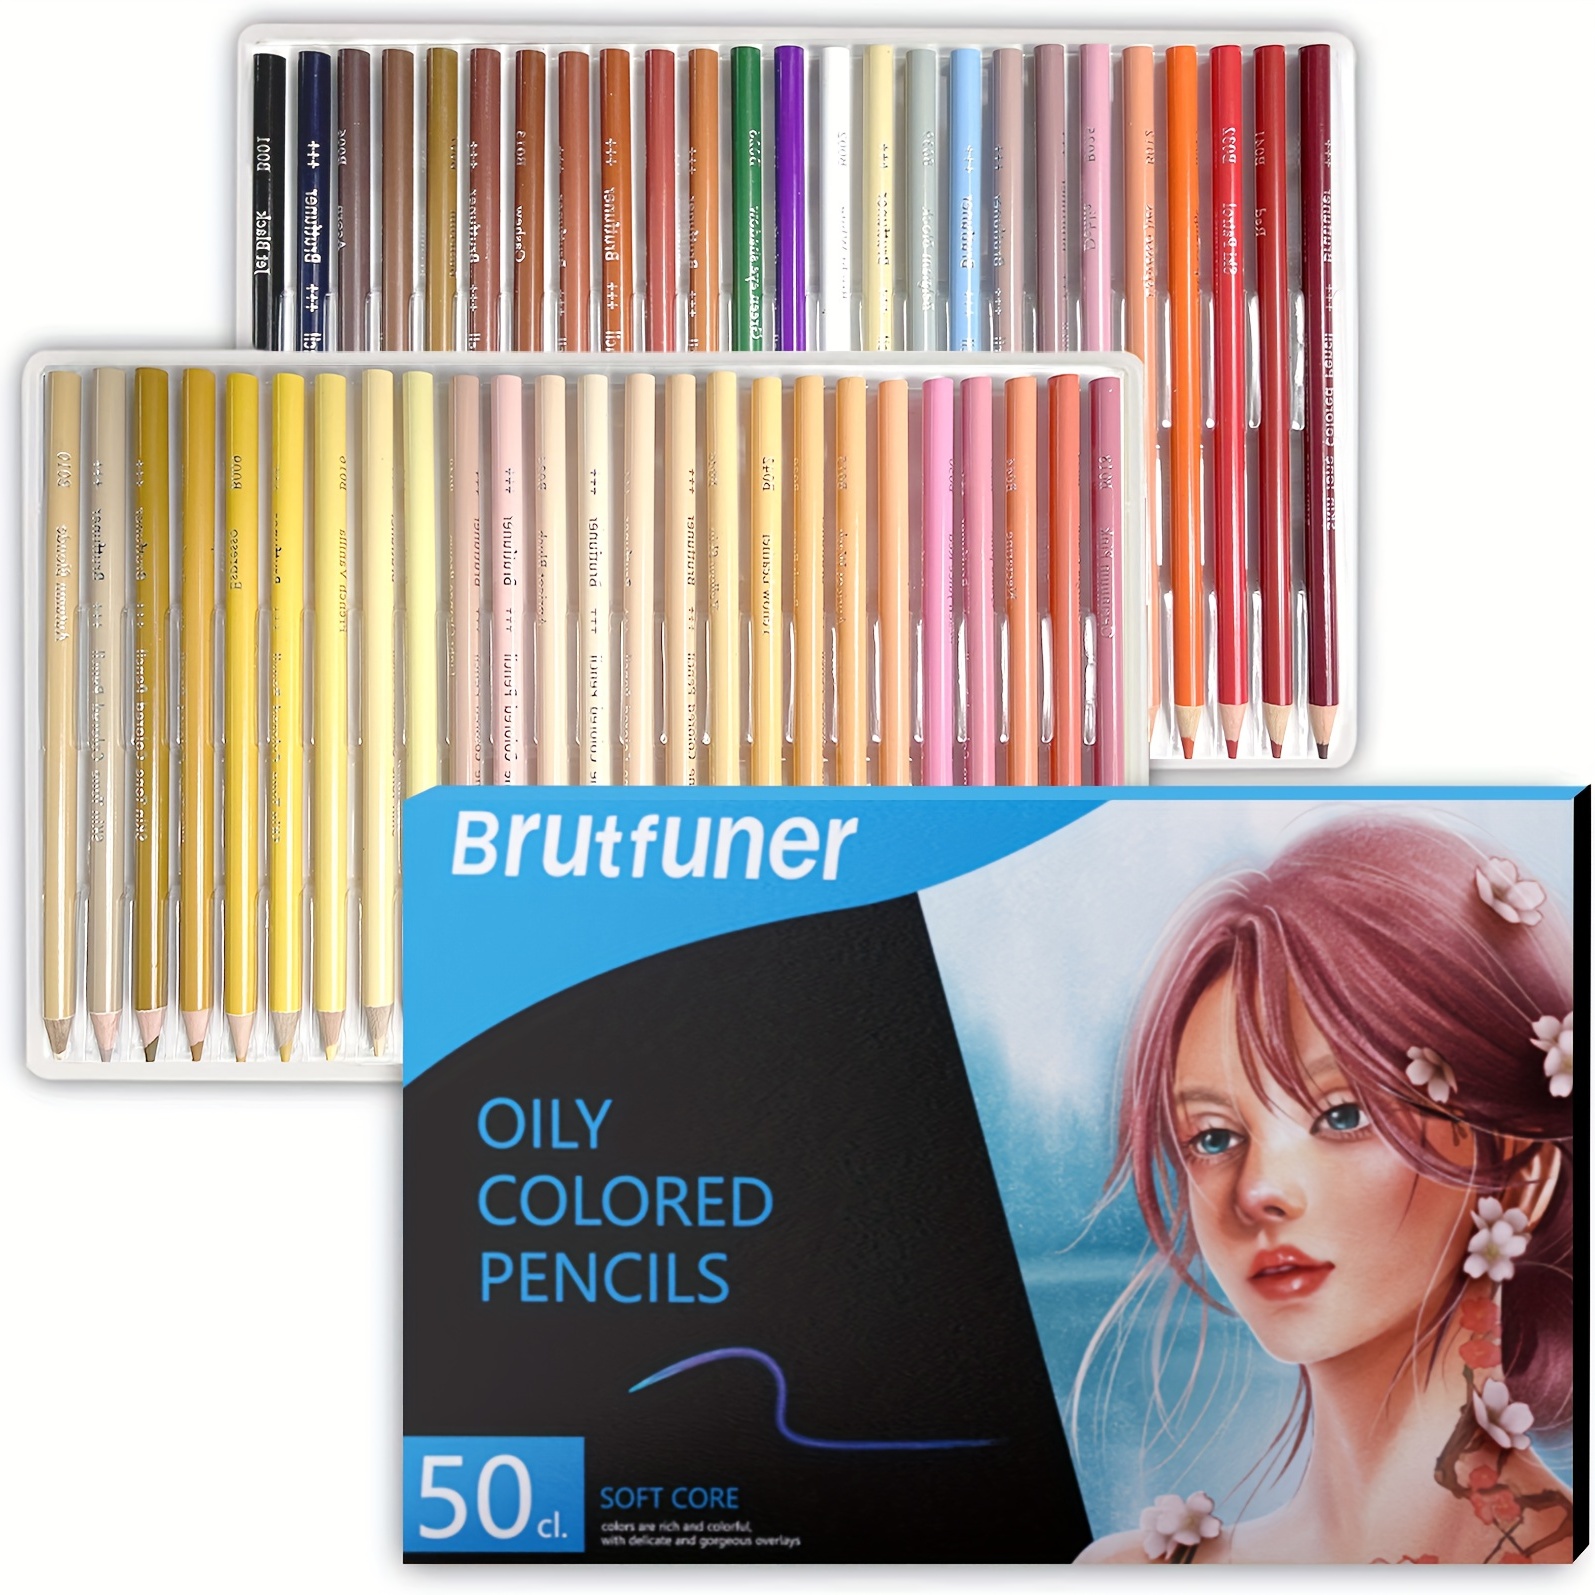 MISULOVE Professional Colour Charcoal Pencils Drawing Set, Skin Tone  Colored Pencils, Pastel Chalk for Sketching, Drawing, Shading, Coloring,  Layering & Blending for Beginners & Artists(12 Colors)